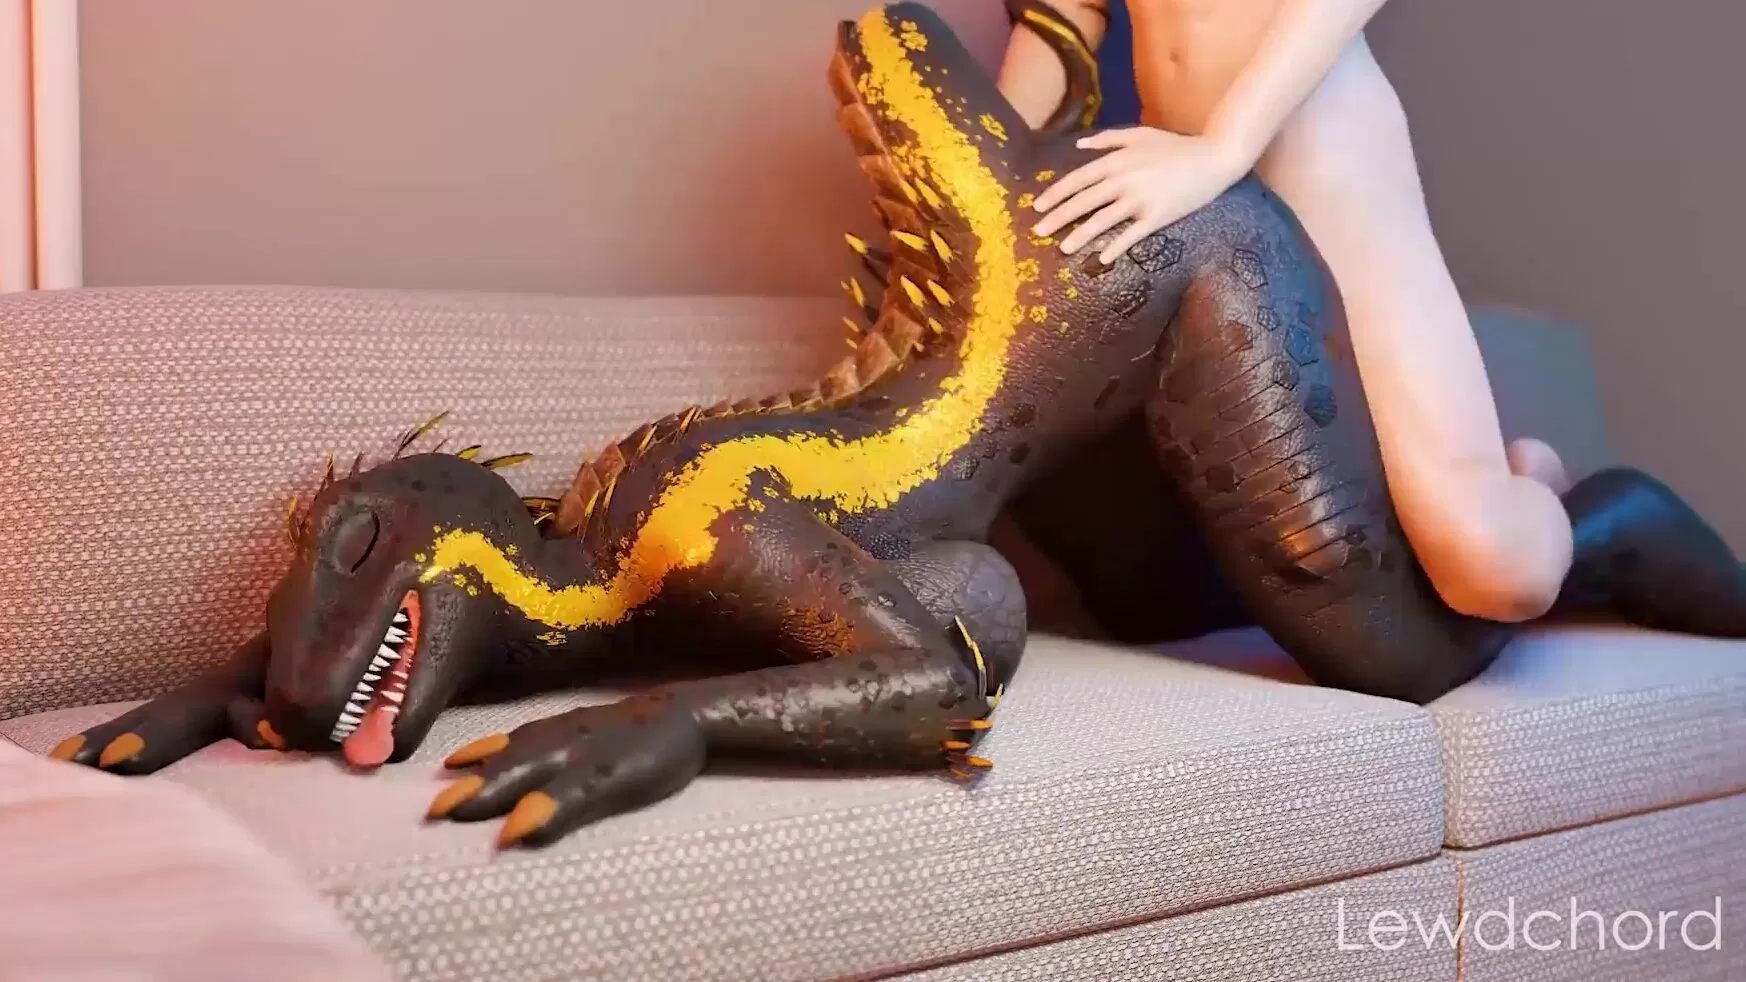 Furry Doggystyle Pov - Hot 3D Furry Porn: Sexy Busty Lizard-girl Gets Doggy-fucked By a Man On the  Sofa